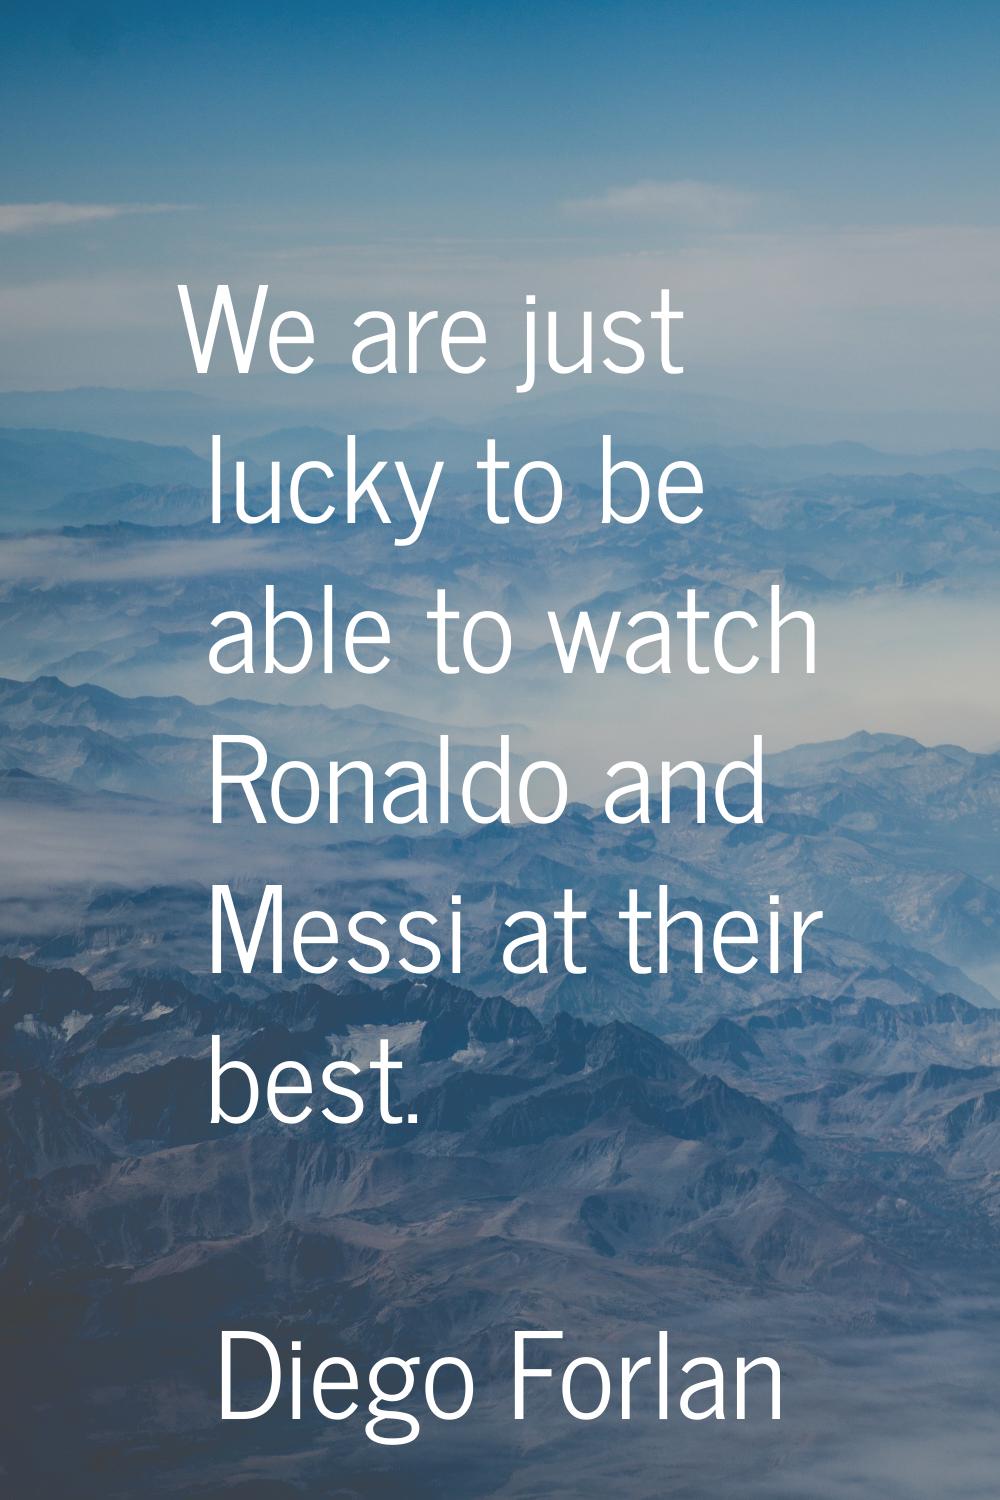 We are just lucky to be able to watch Ronaldo and Messi at their best.